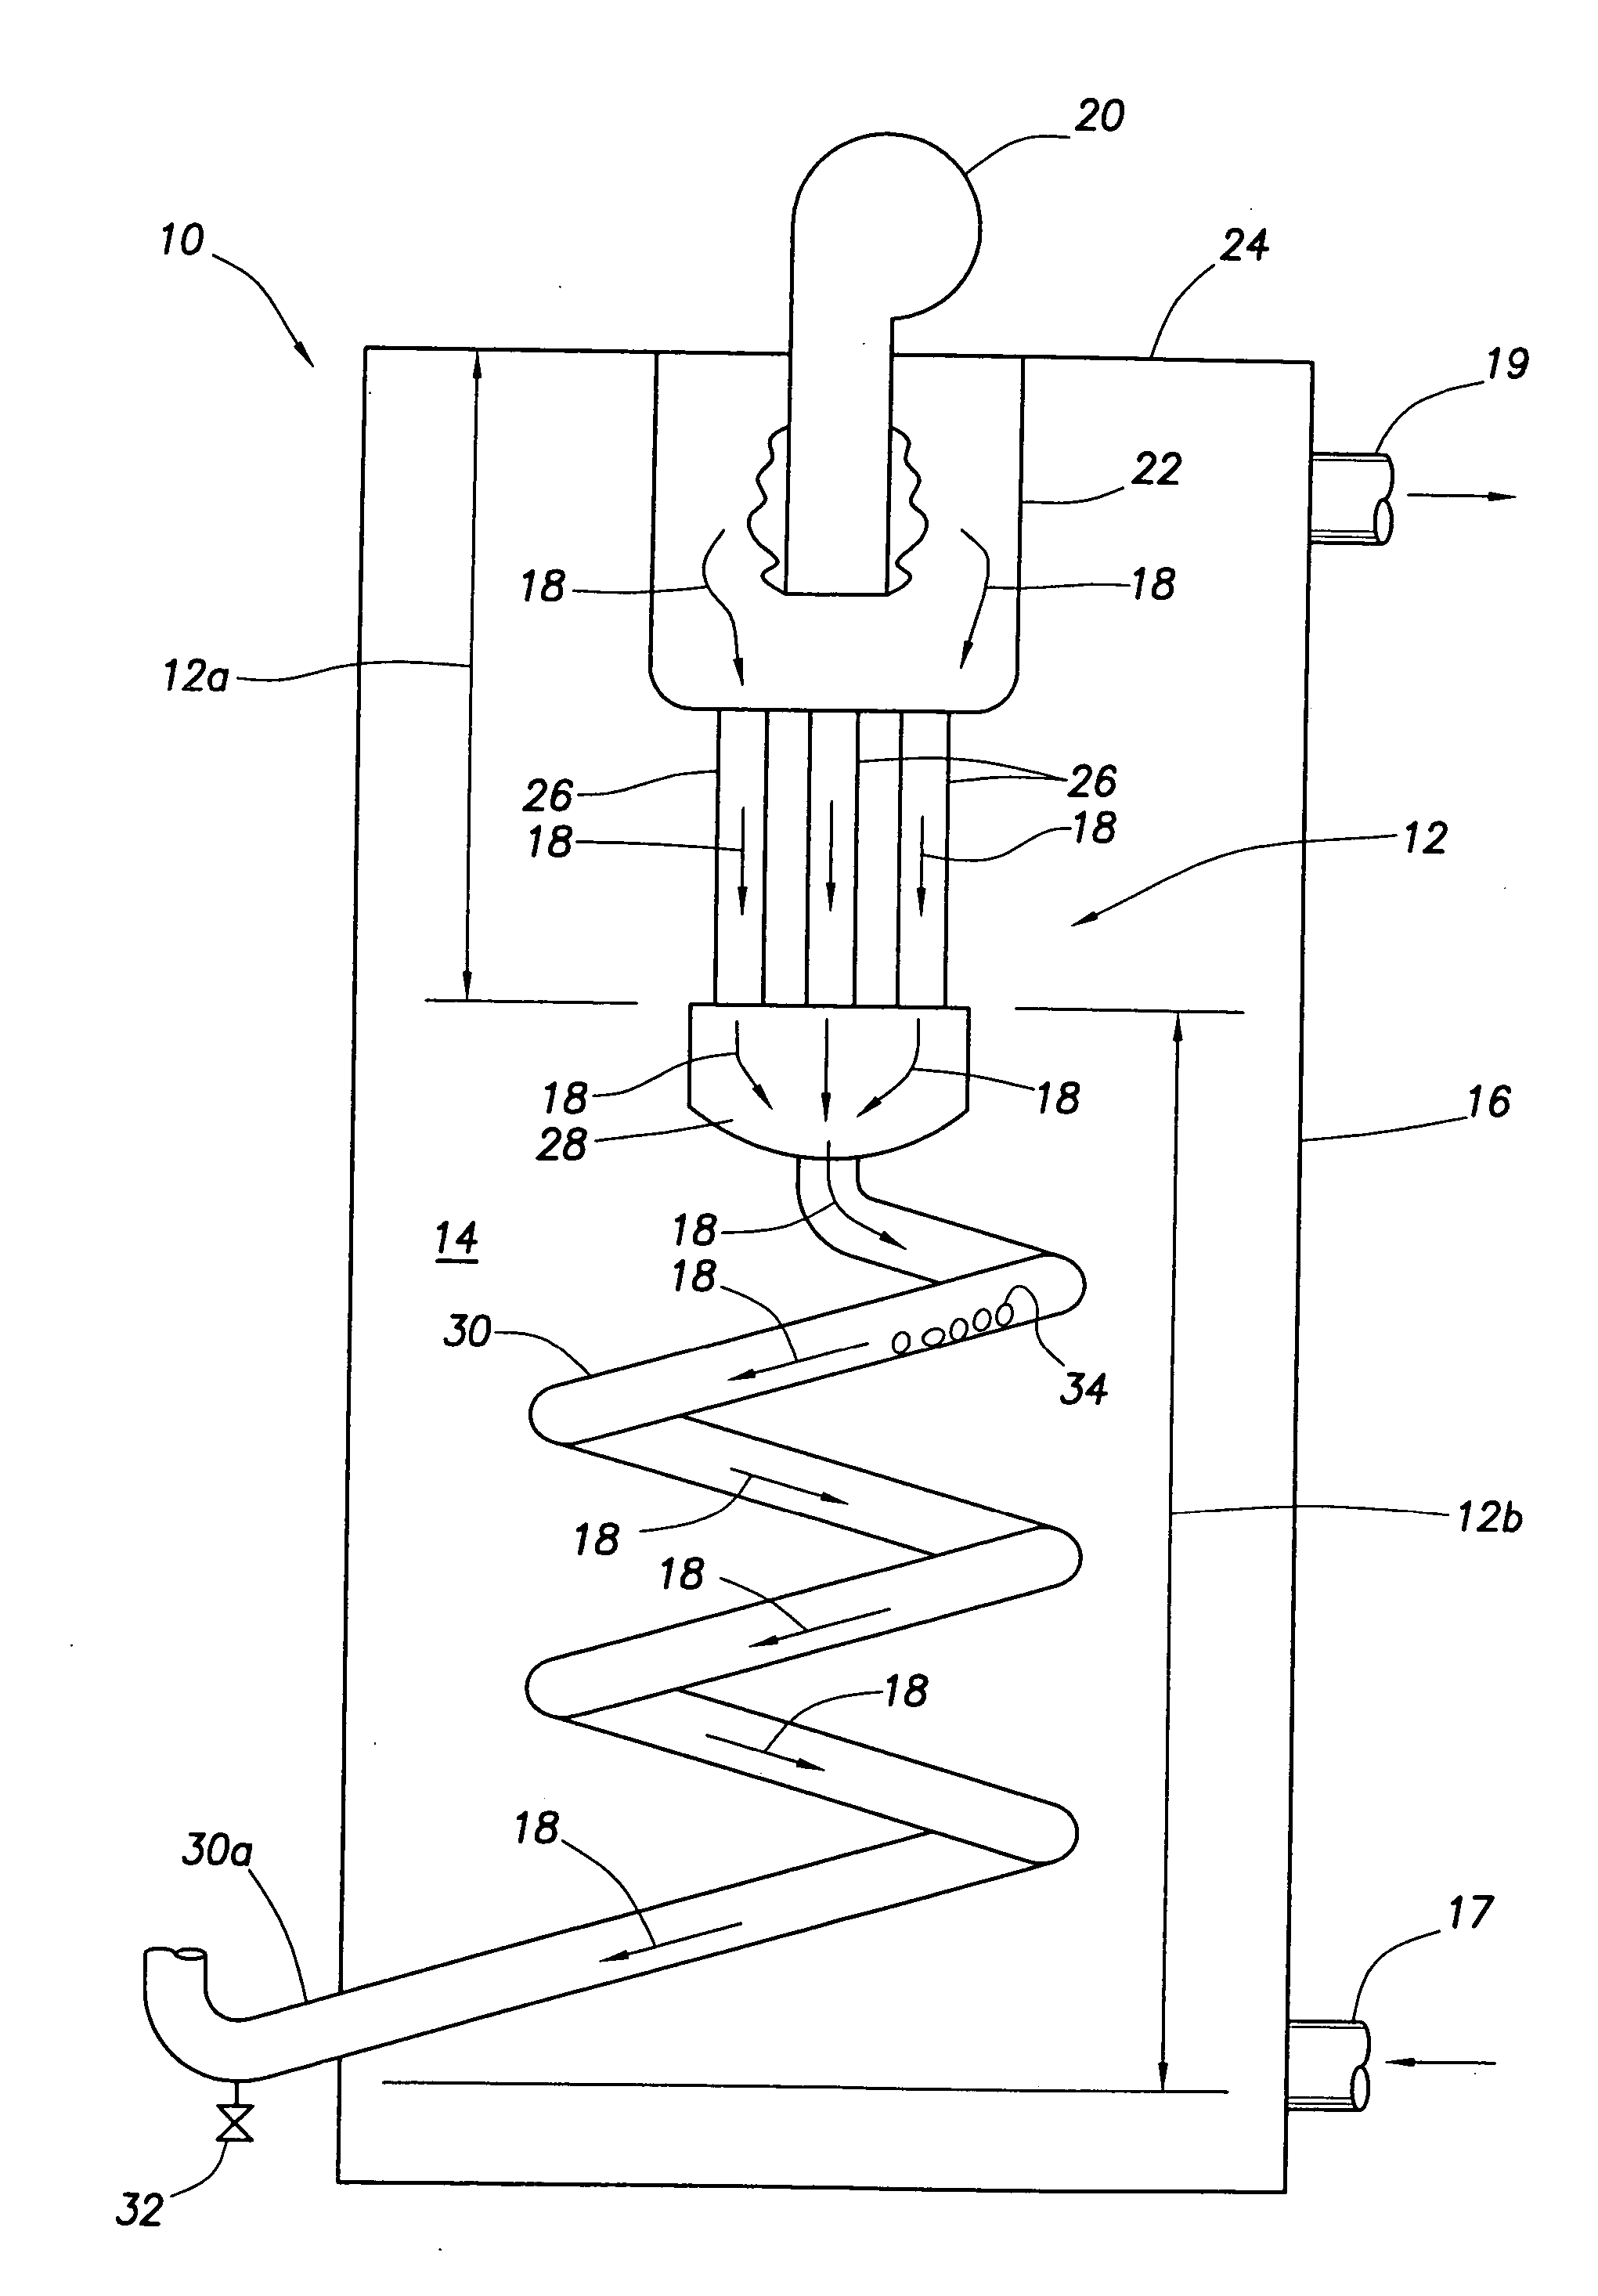 Single pass fuel-fired fluid heating/storage device